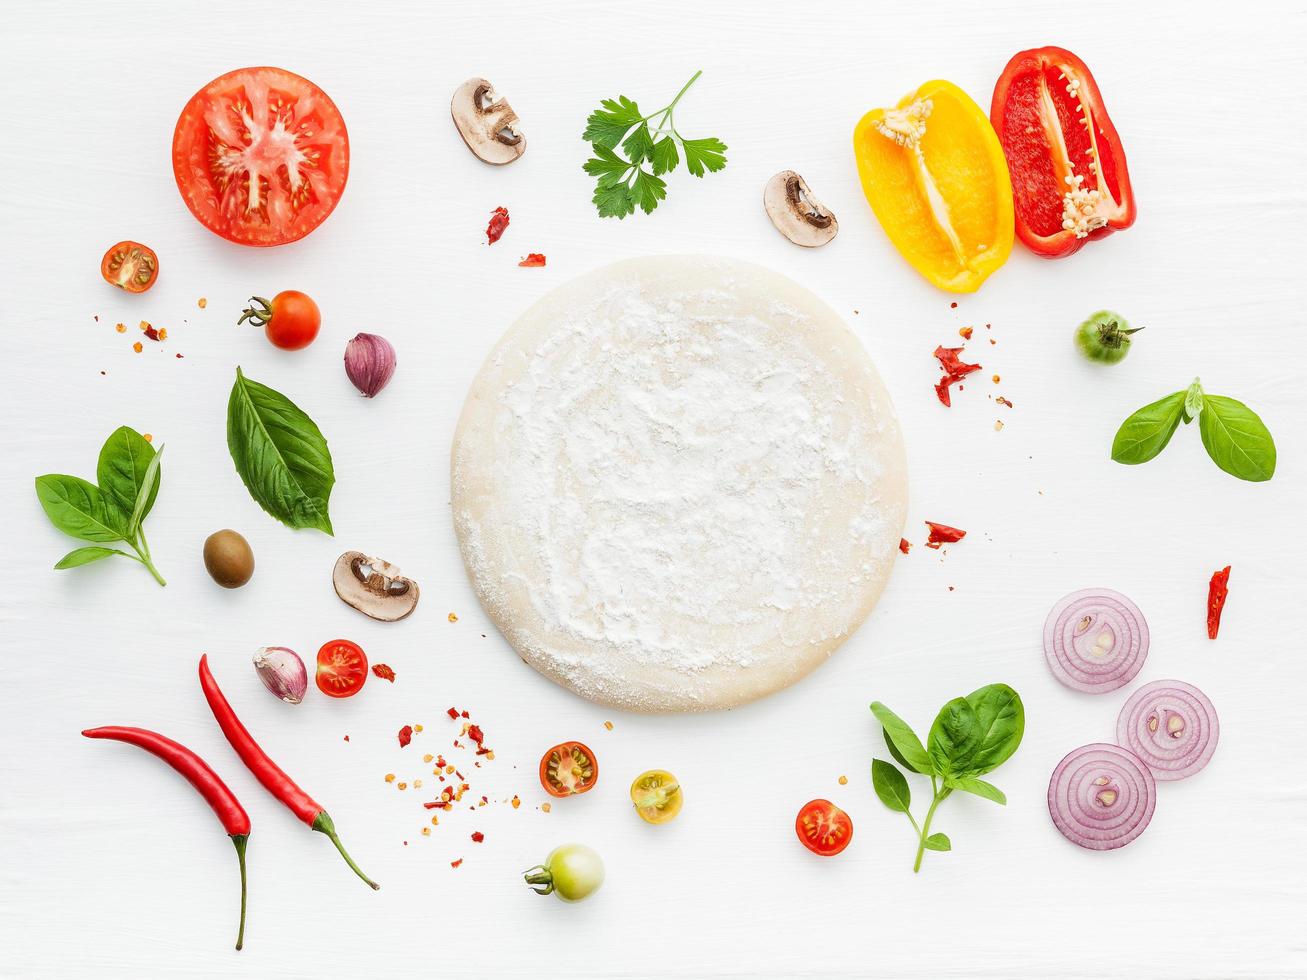 Pizza dough and ingredients on white photo